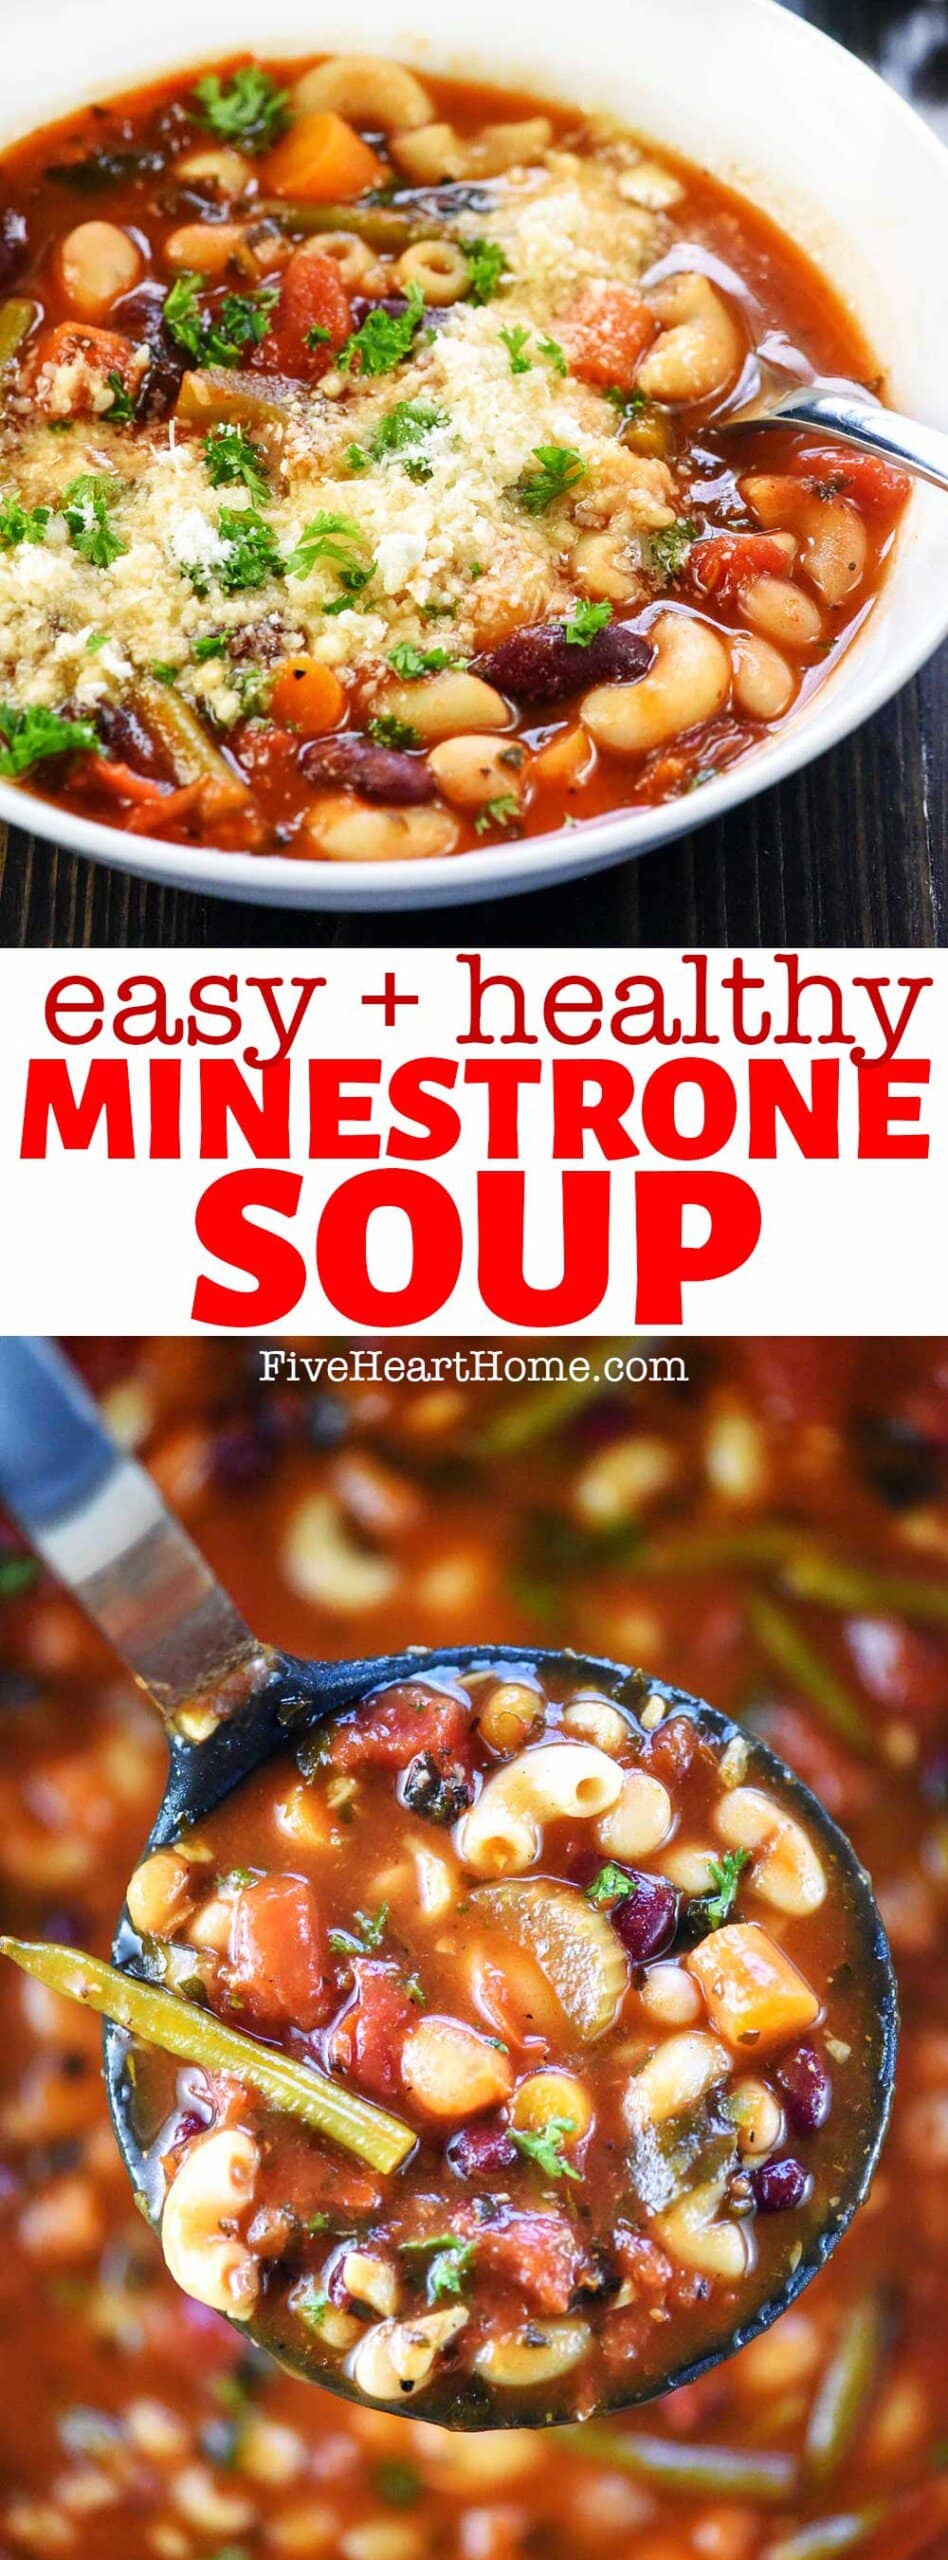 Minestrone Soup ~ a quick, easy, healthy minestrone soup recipe that's delicious, loaded with flavor, and simple to customize using your favorite vegetables…and it’s even better than Olive Garden minestrone soup! | FiveHeartHome.com via @fivehearthome